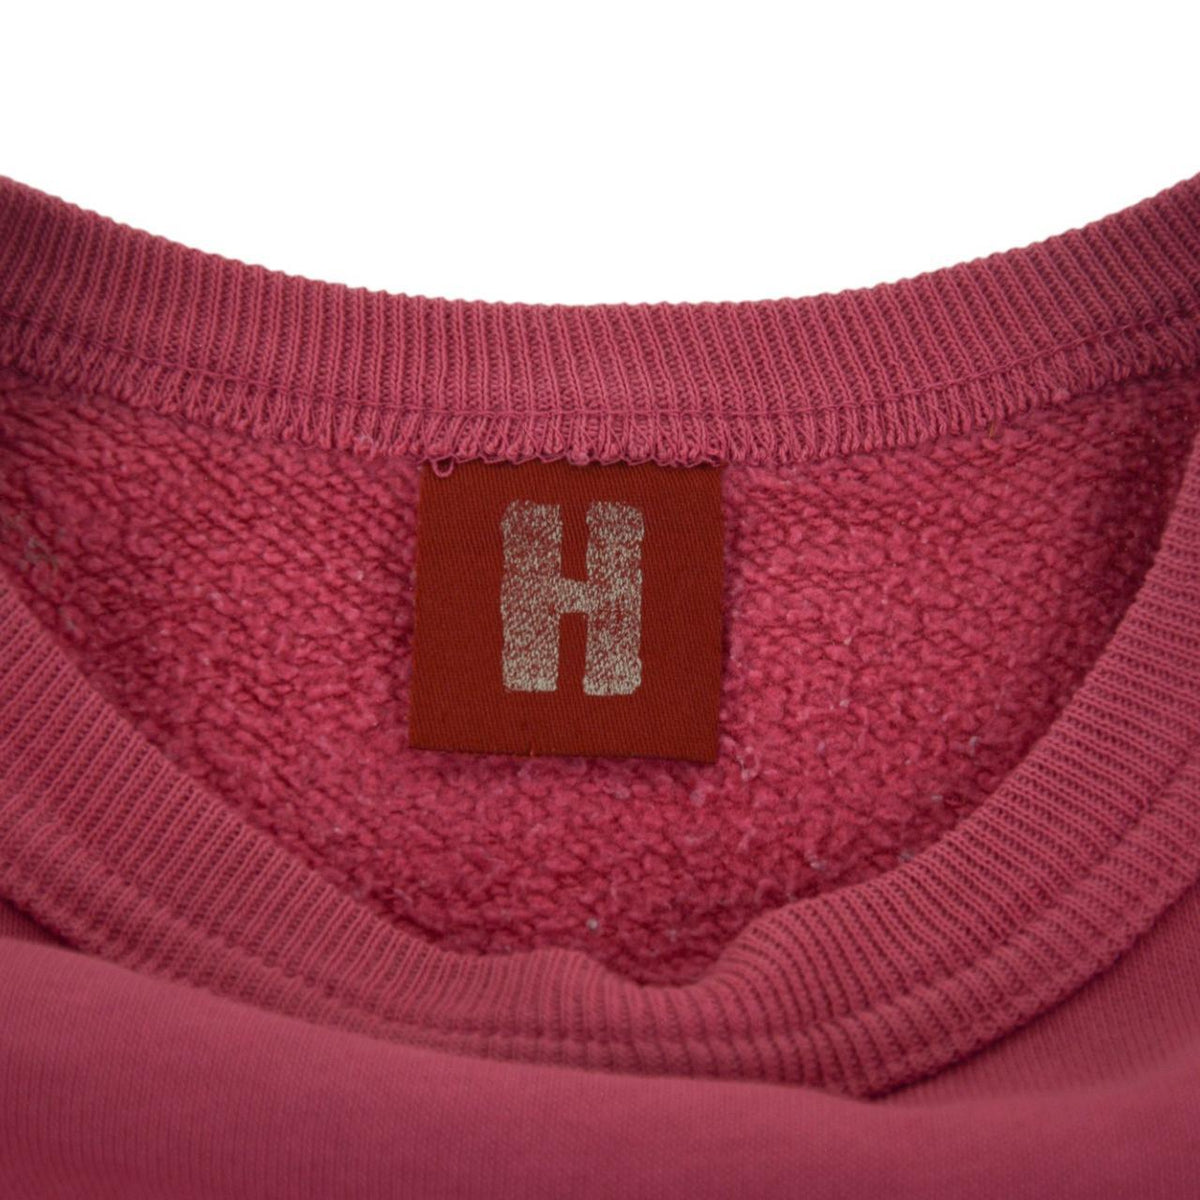 Vintage Hysteric Glamour Sweatshirt Woman’s Size S